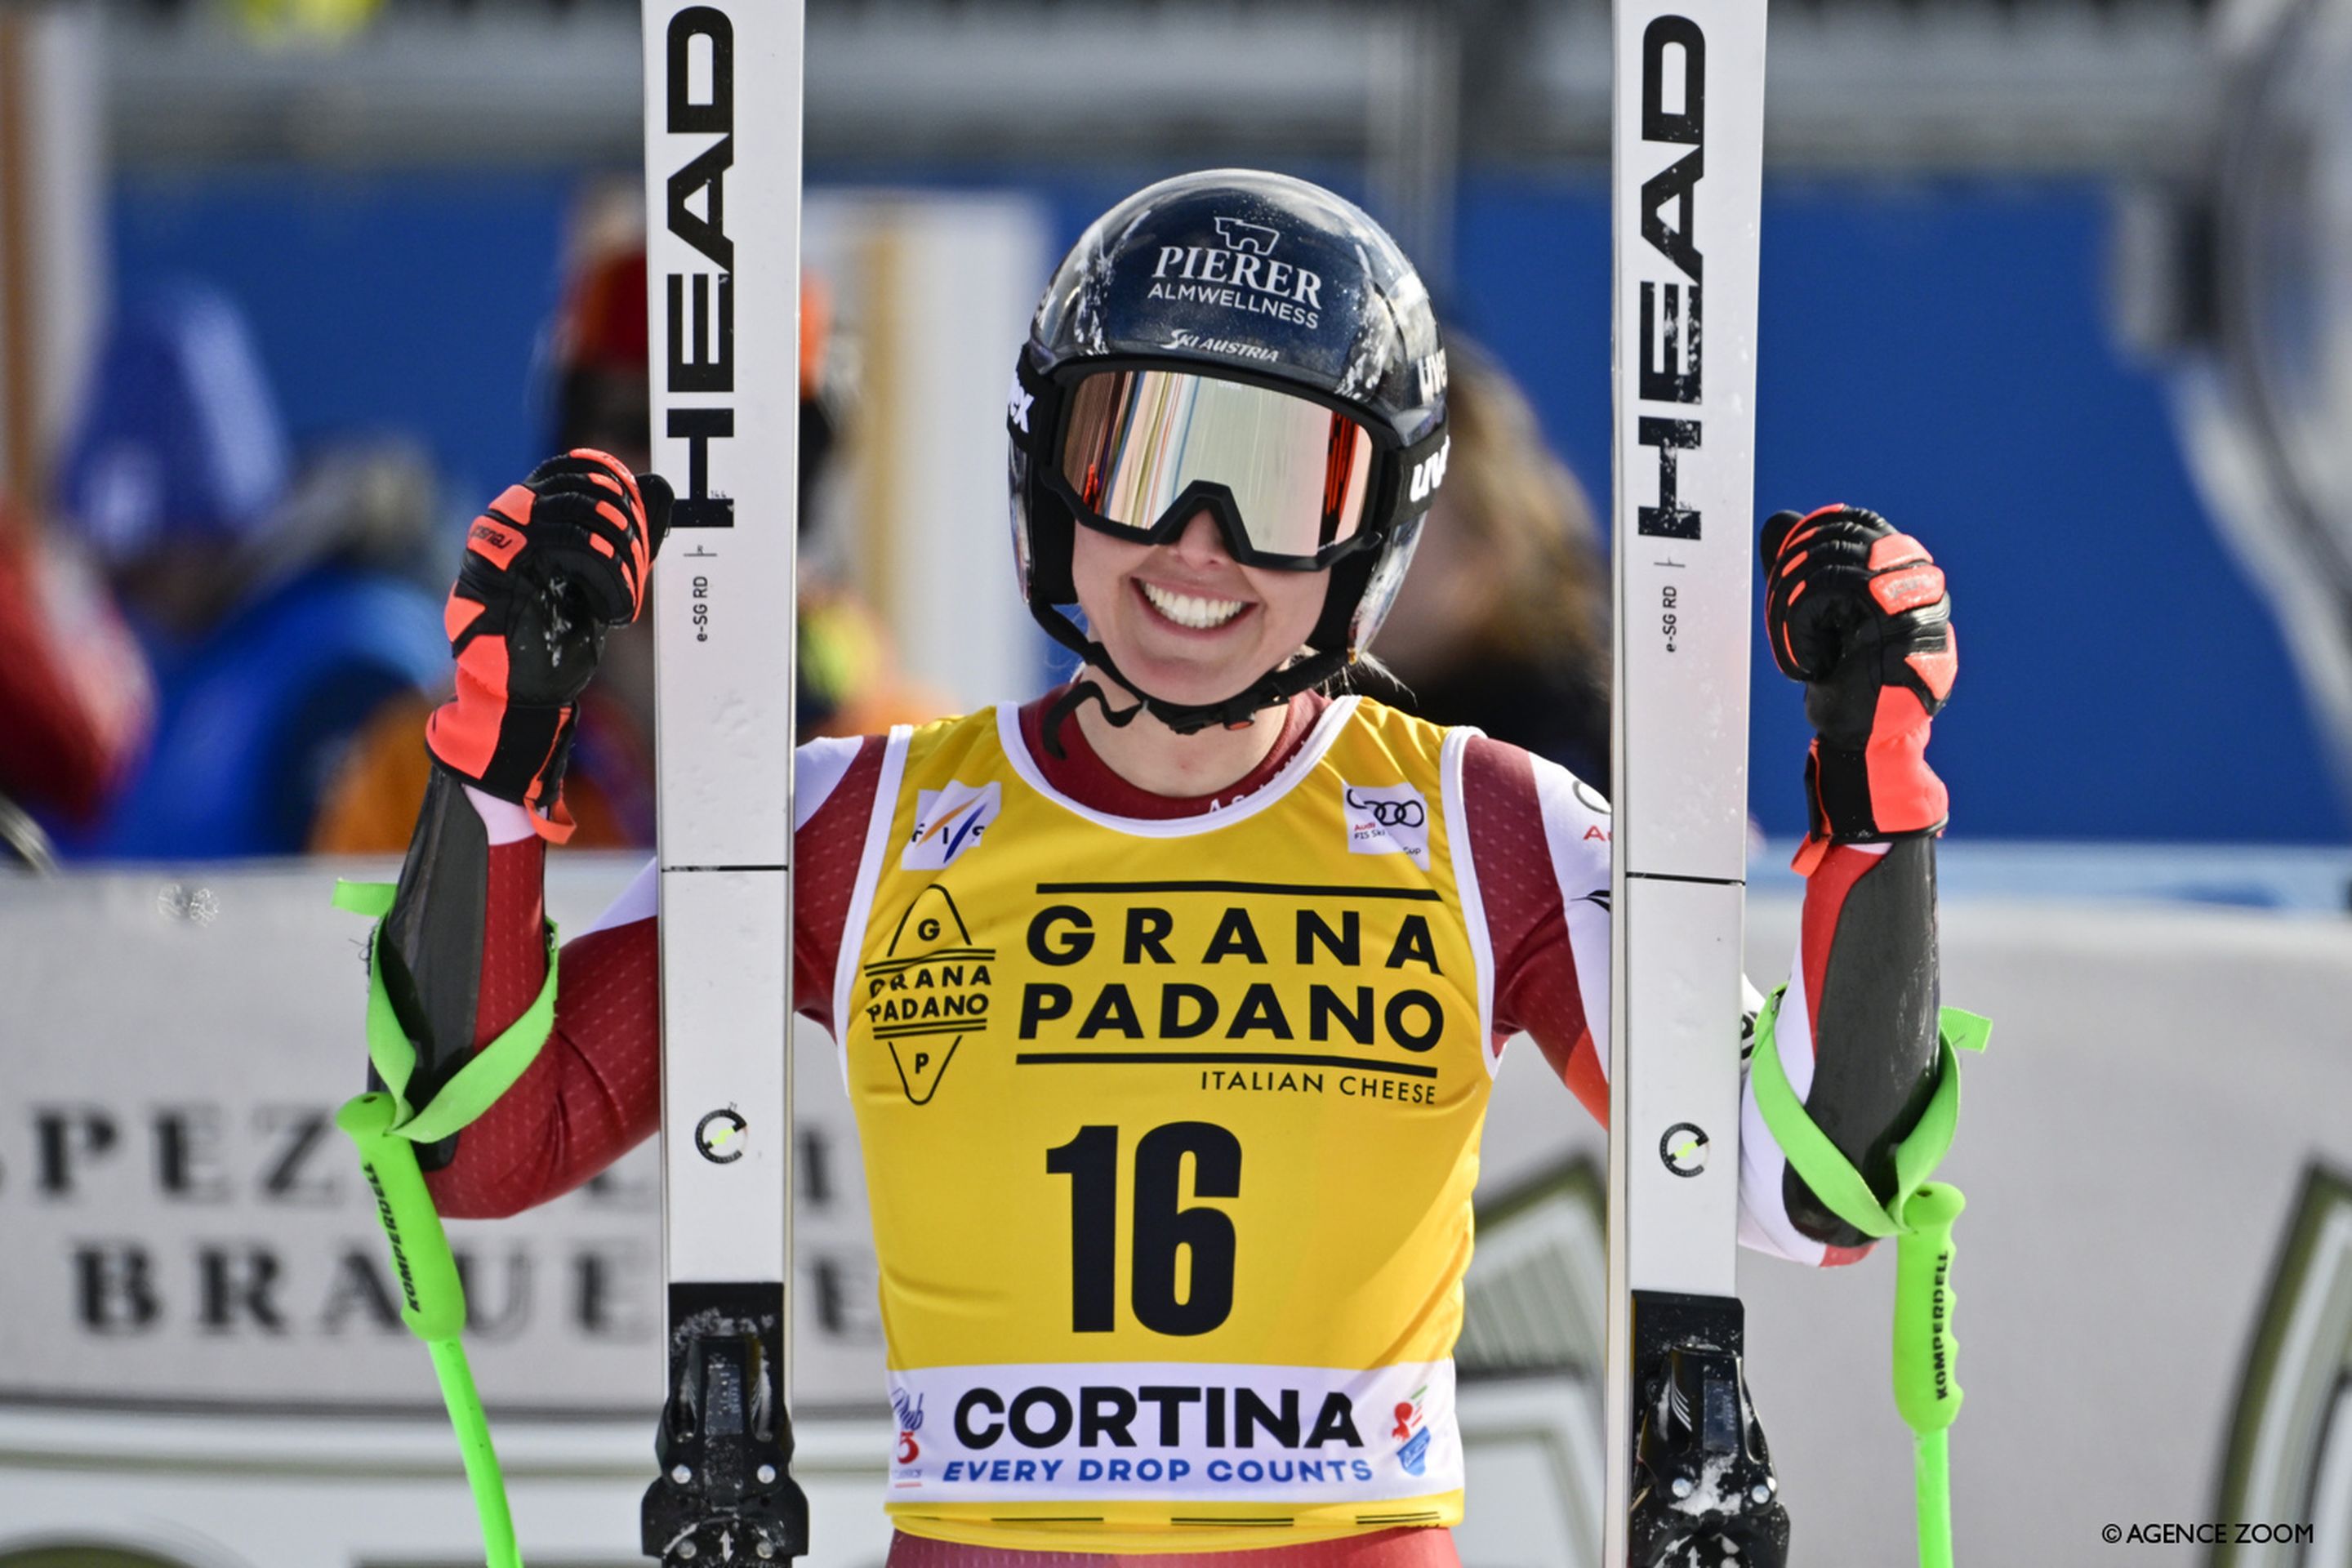 Austria's Cornelia Huetter is all smiles after finishing second (Agence Zoom)